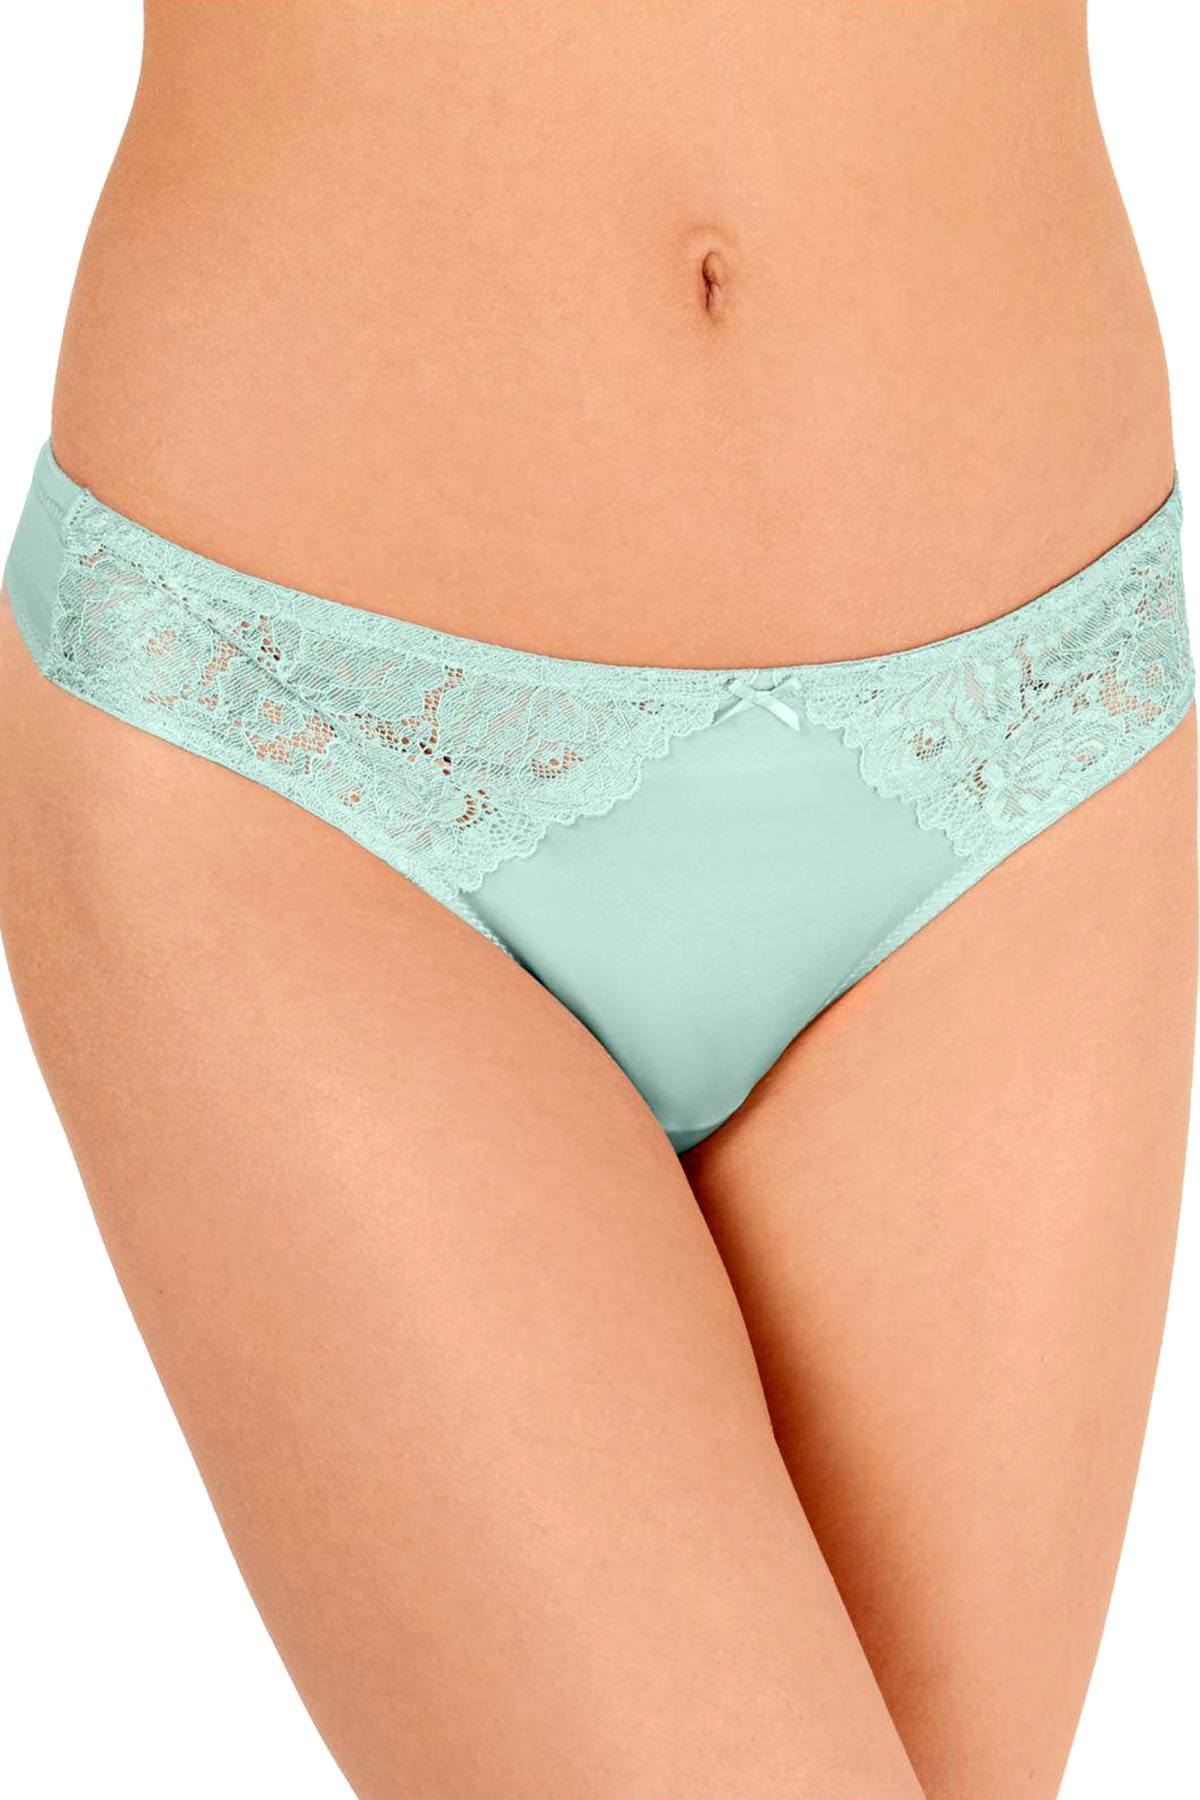 INC International Concepts Smooth Lace Thong in Blue Light